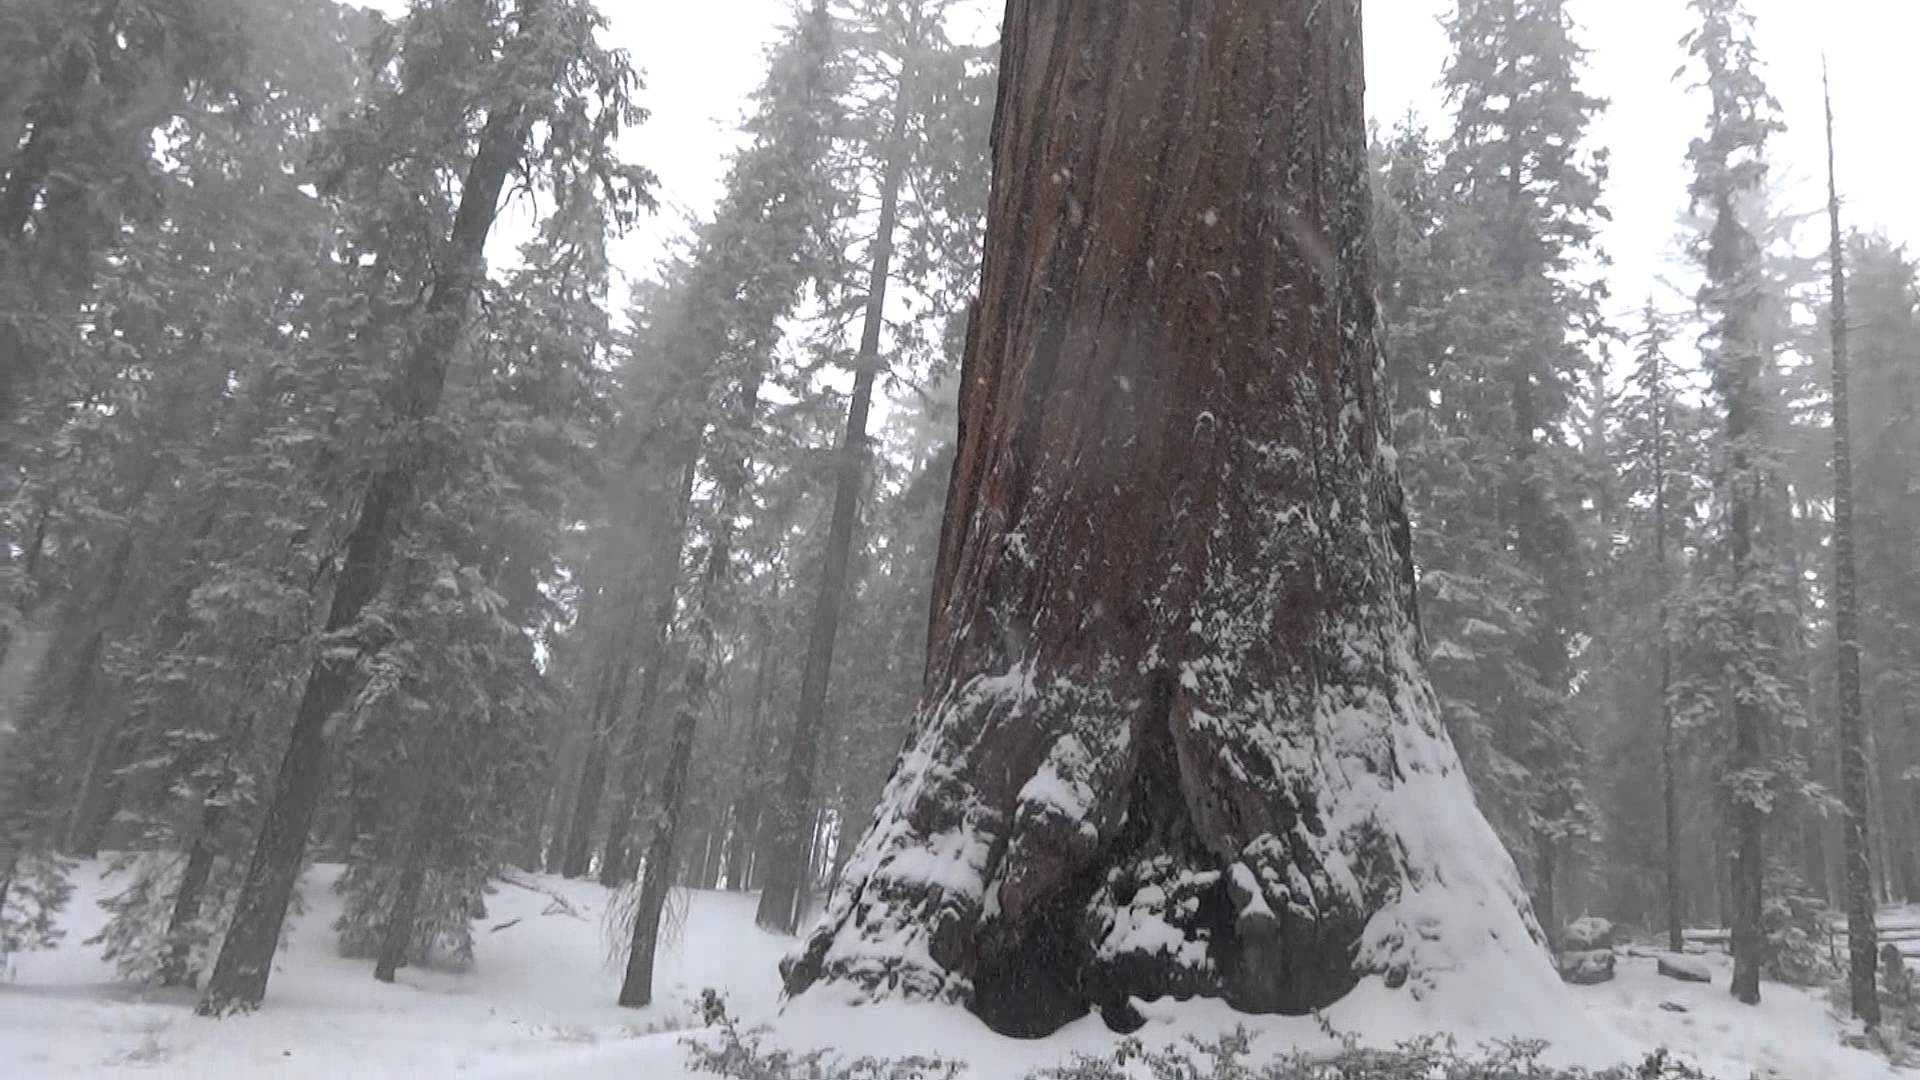 Grants Grove (Kings Canyon National Park) in the snow